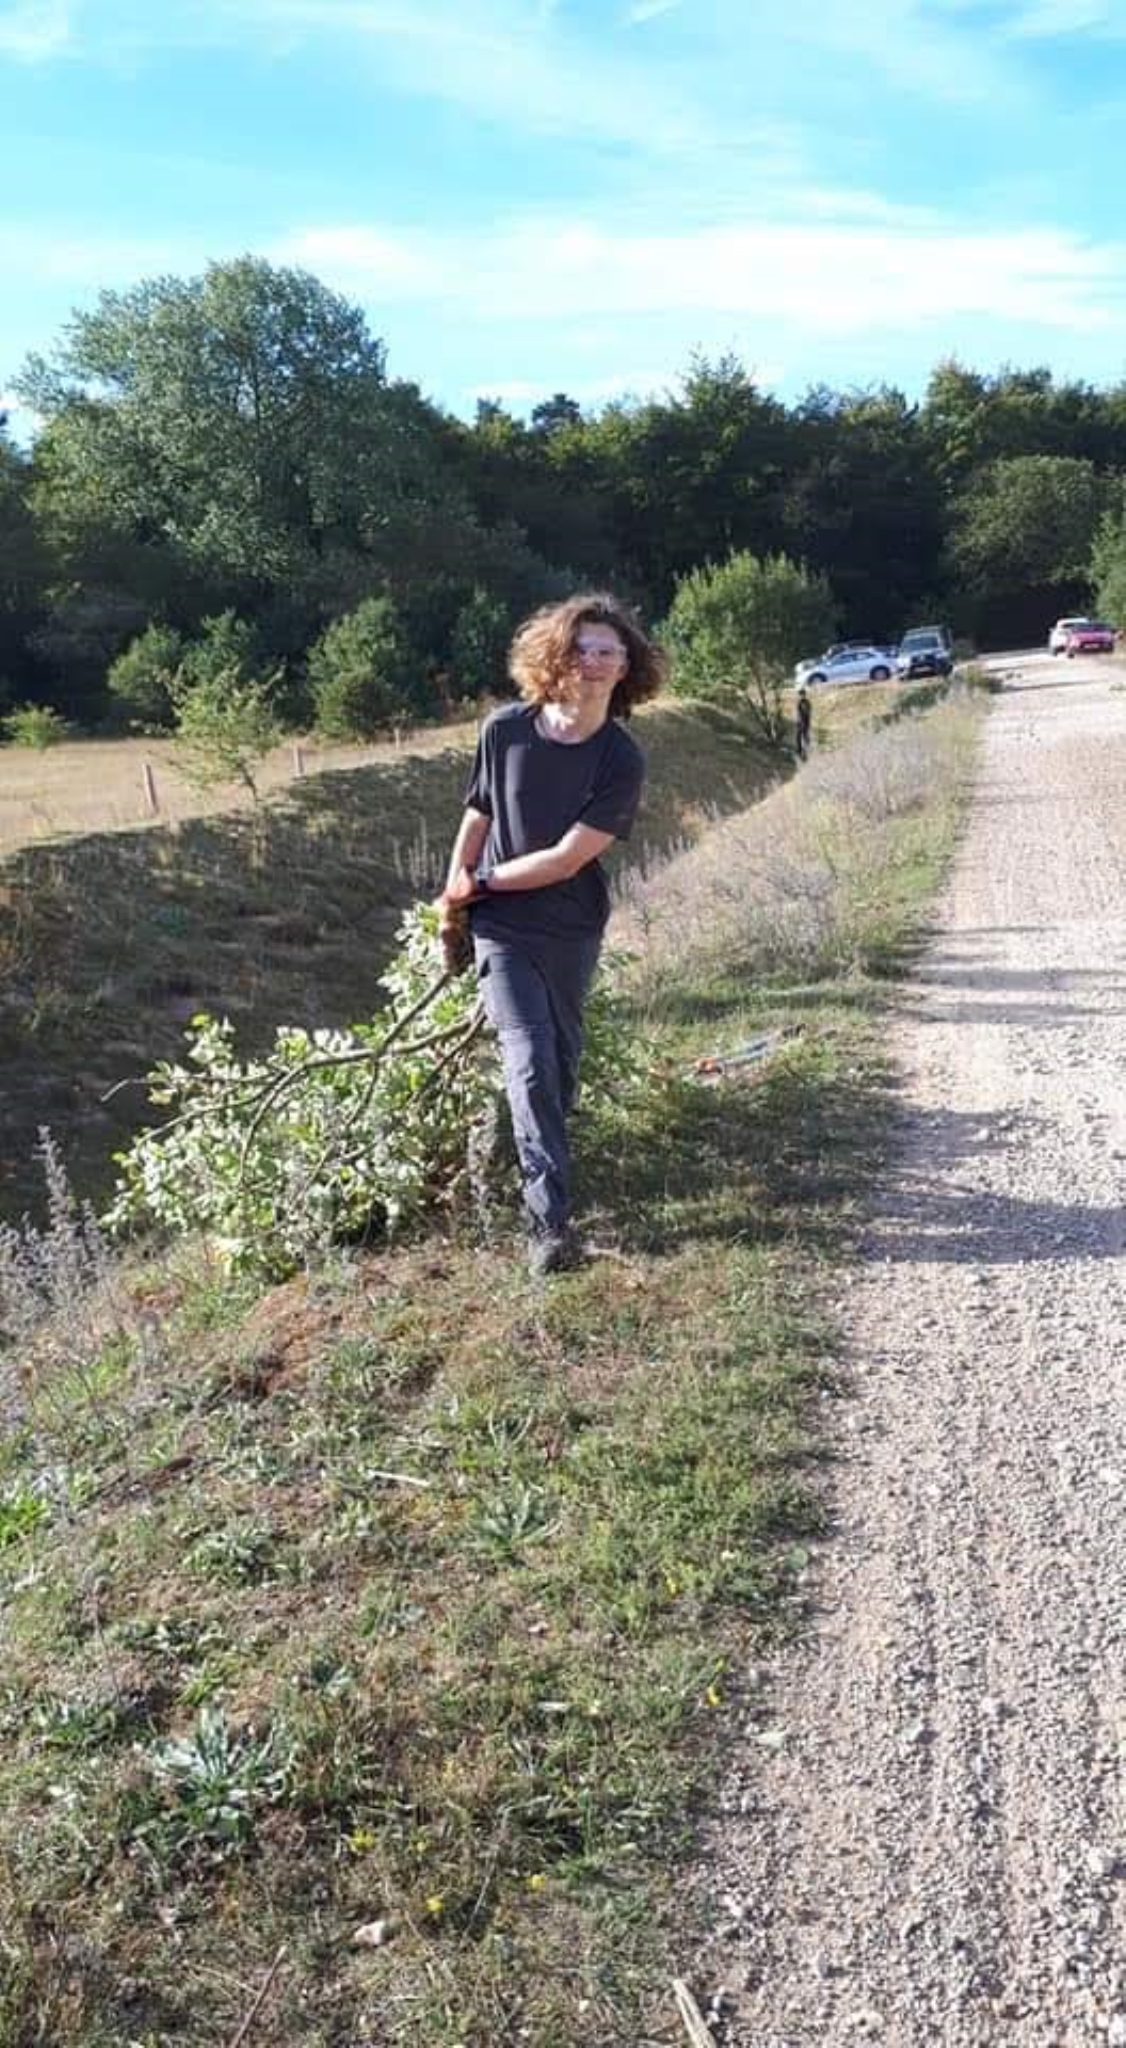 A photo from the FoTF Conservation Event - September 2019 - Scrub Clearance at Cranwich Camp : A volunteers drags a large branch